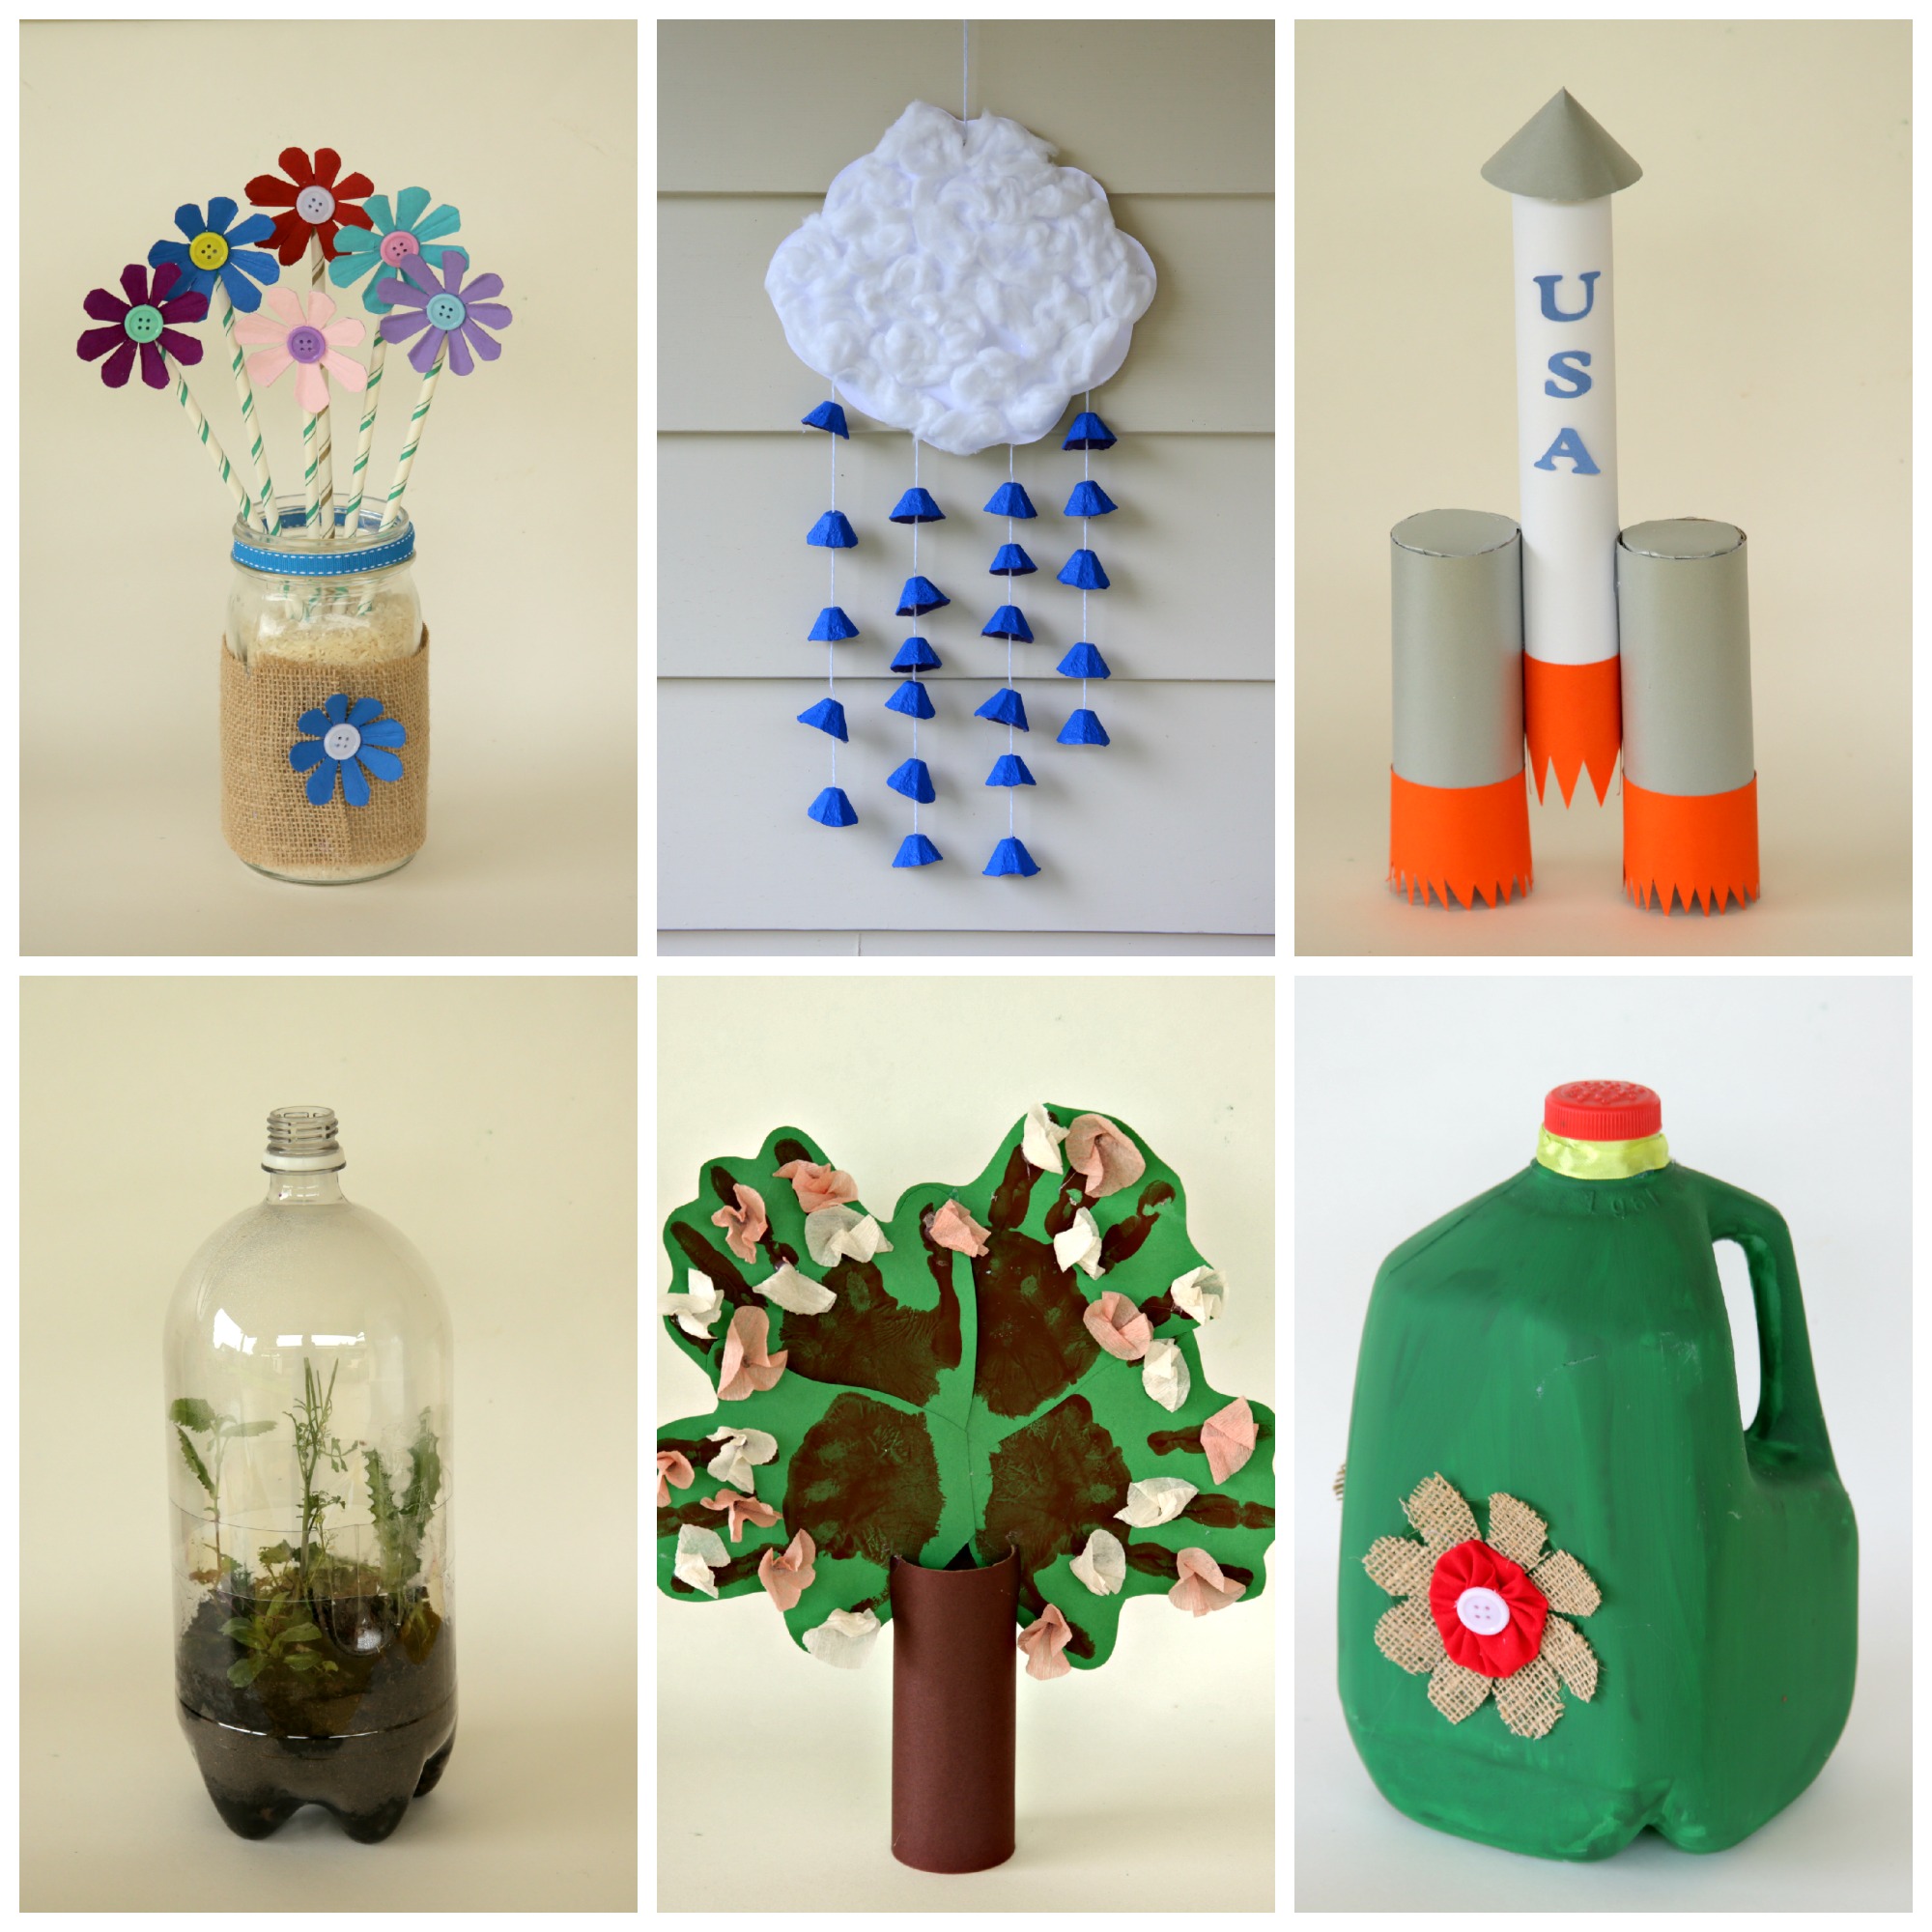 art and craft ideas for kids using recycled materials